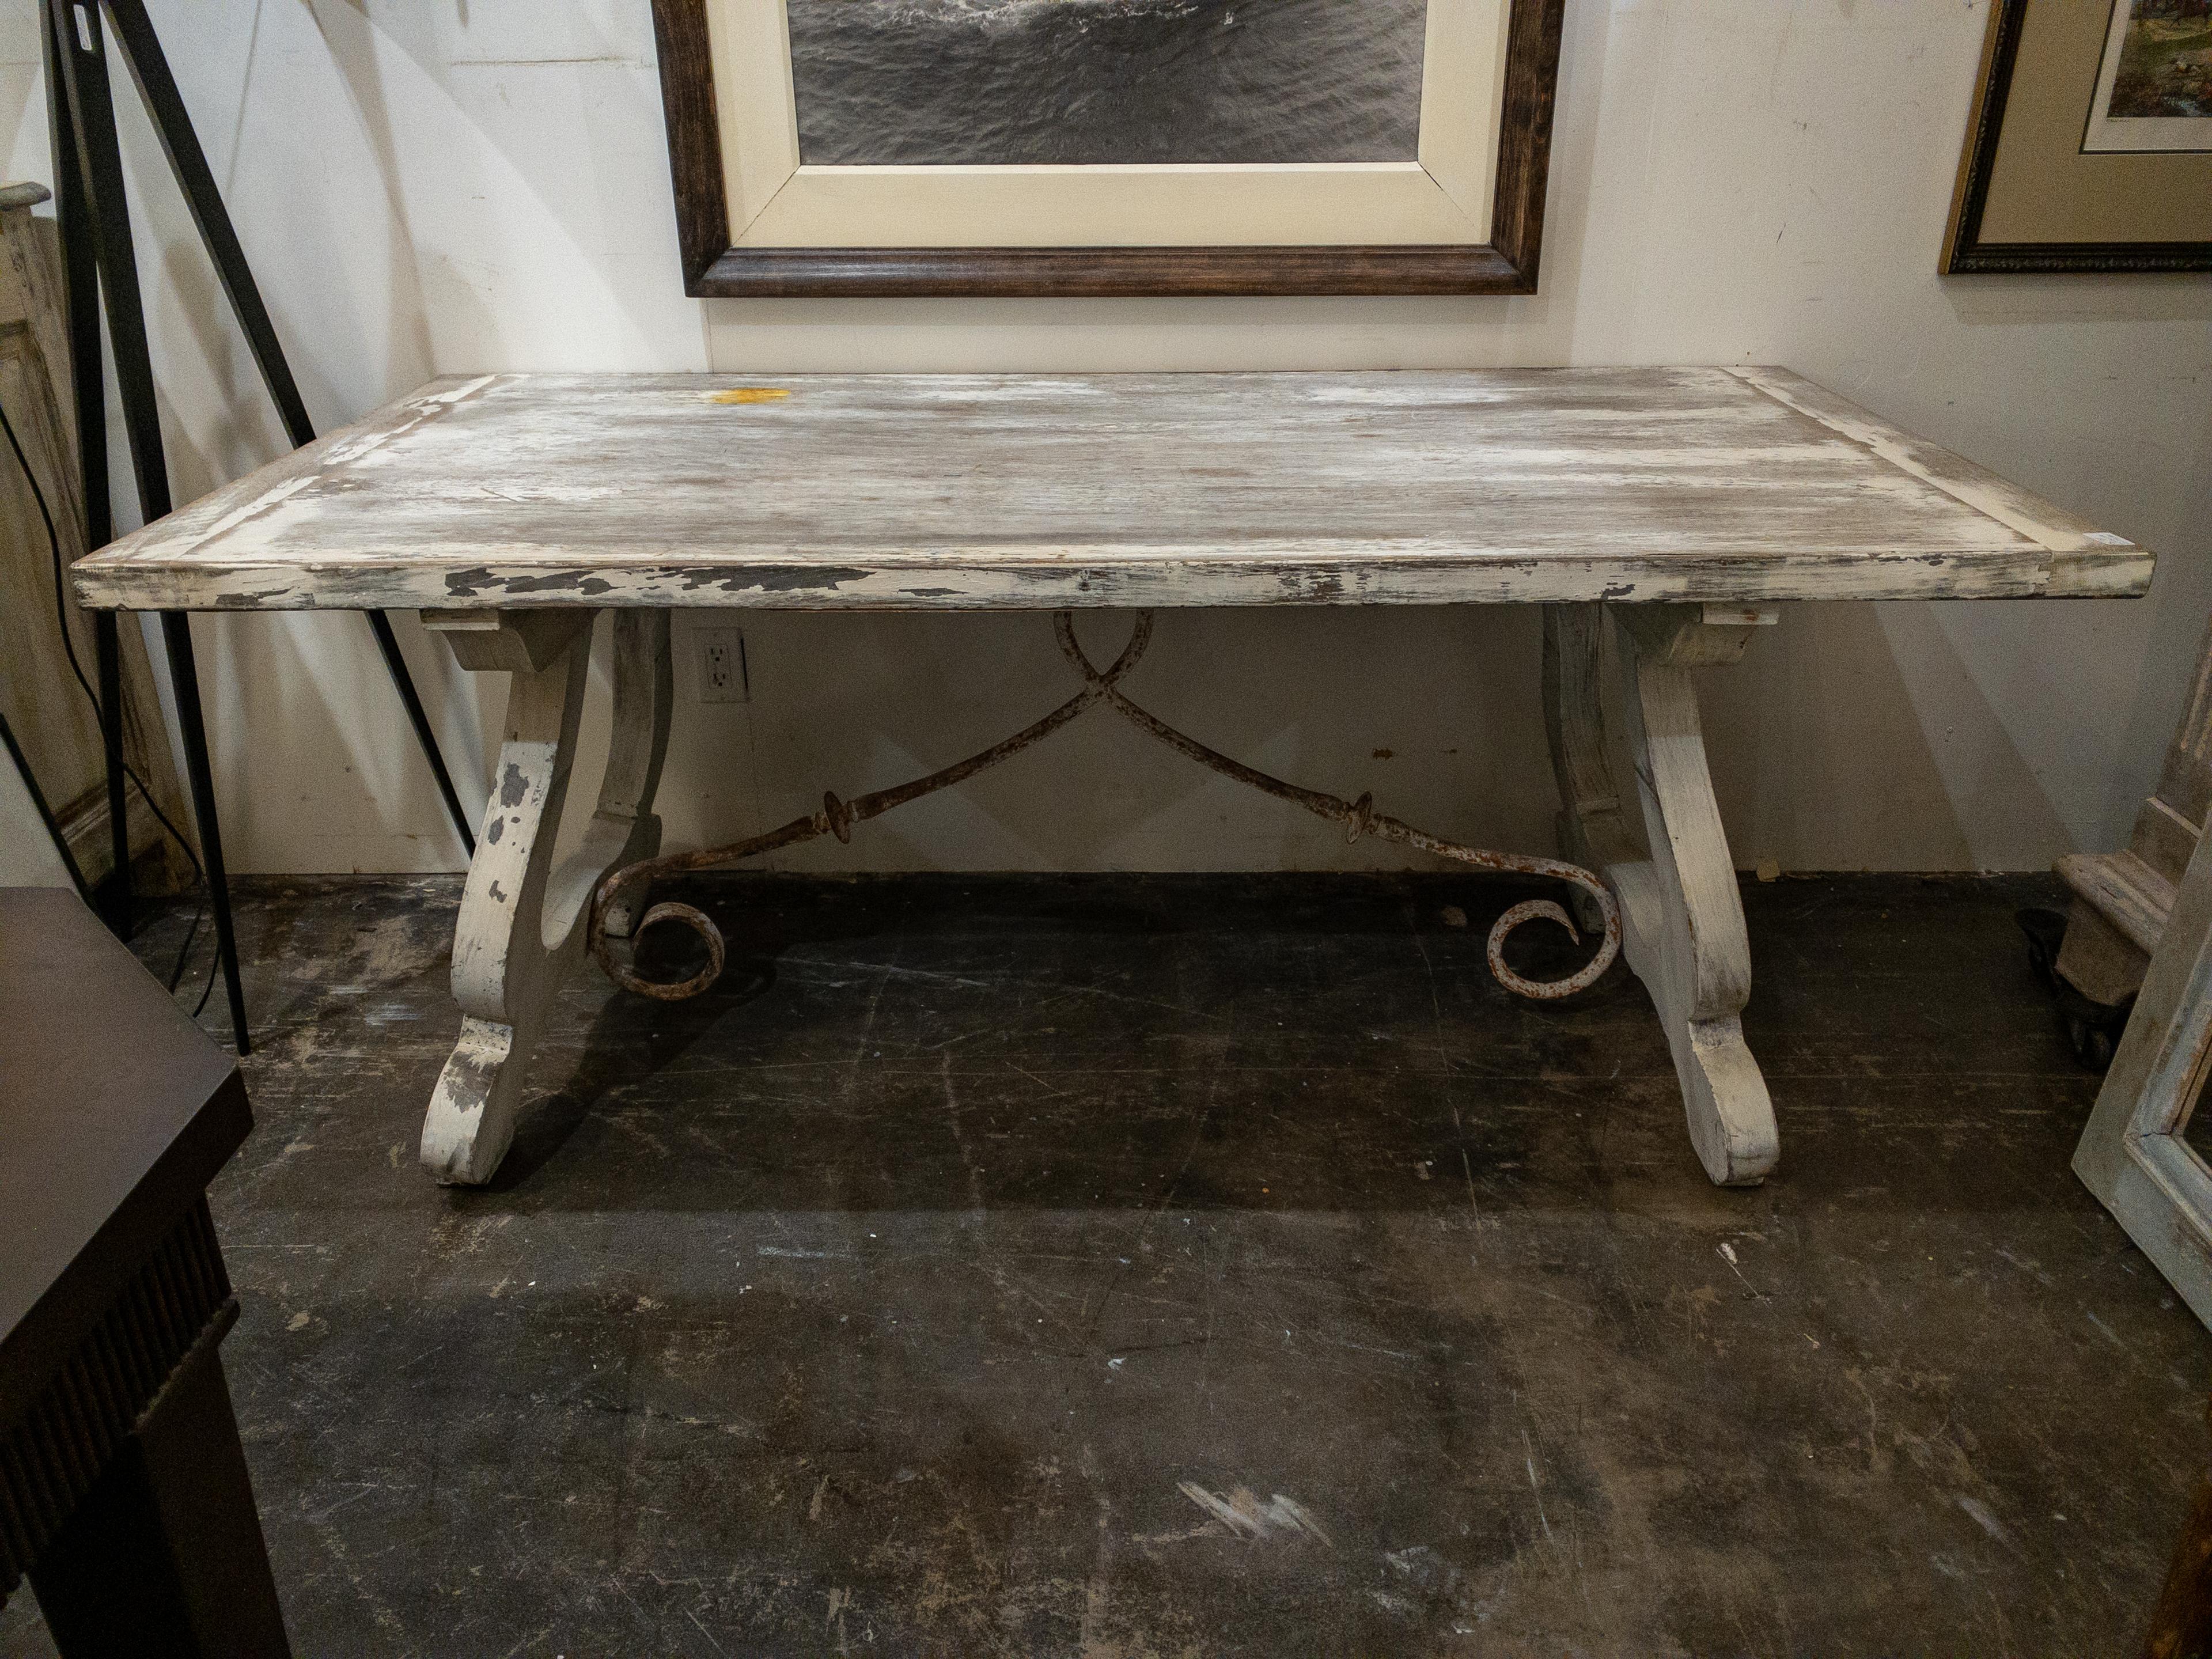 The Late 19th Century white painted dining table is a charming embodiment of rustic elegance and enduring craftsmanship. Its design harks back to a bygone era, where simplicity and functionality were celebrated.

The plank top, a hallmark of this